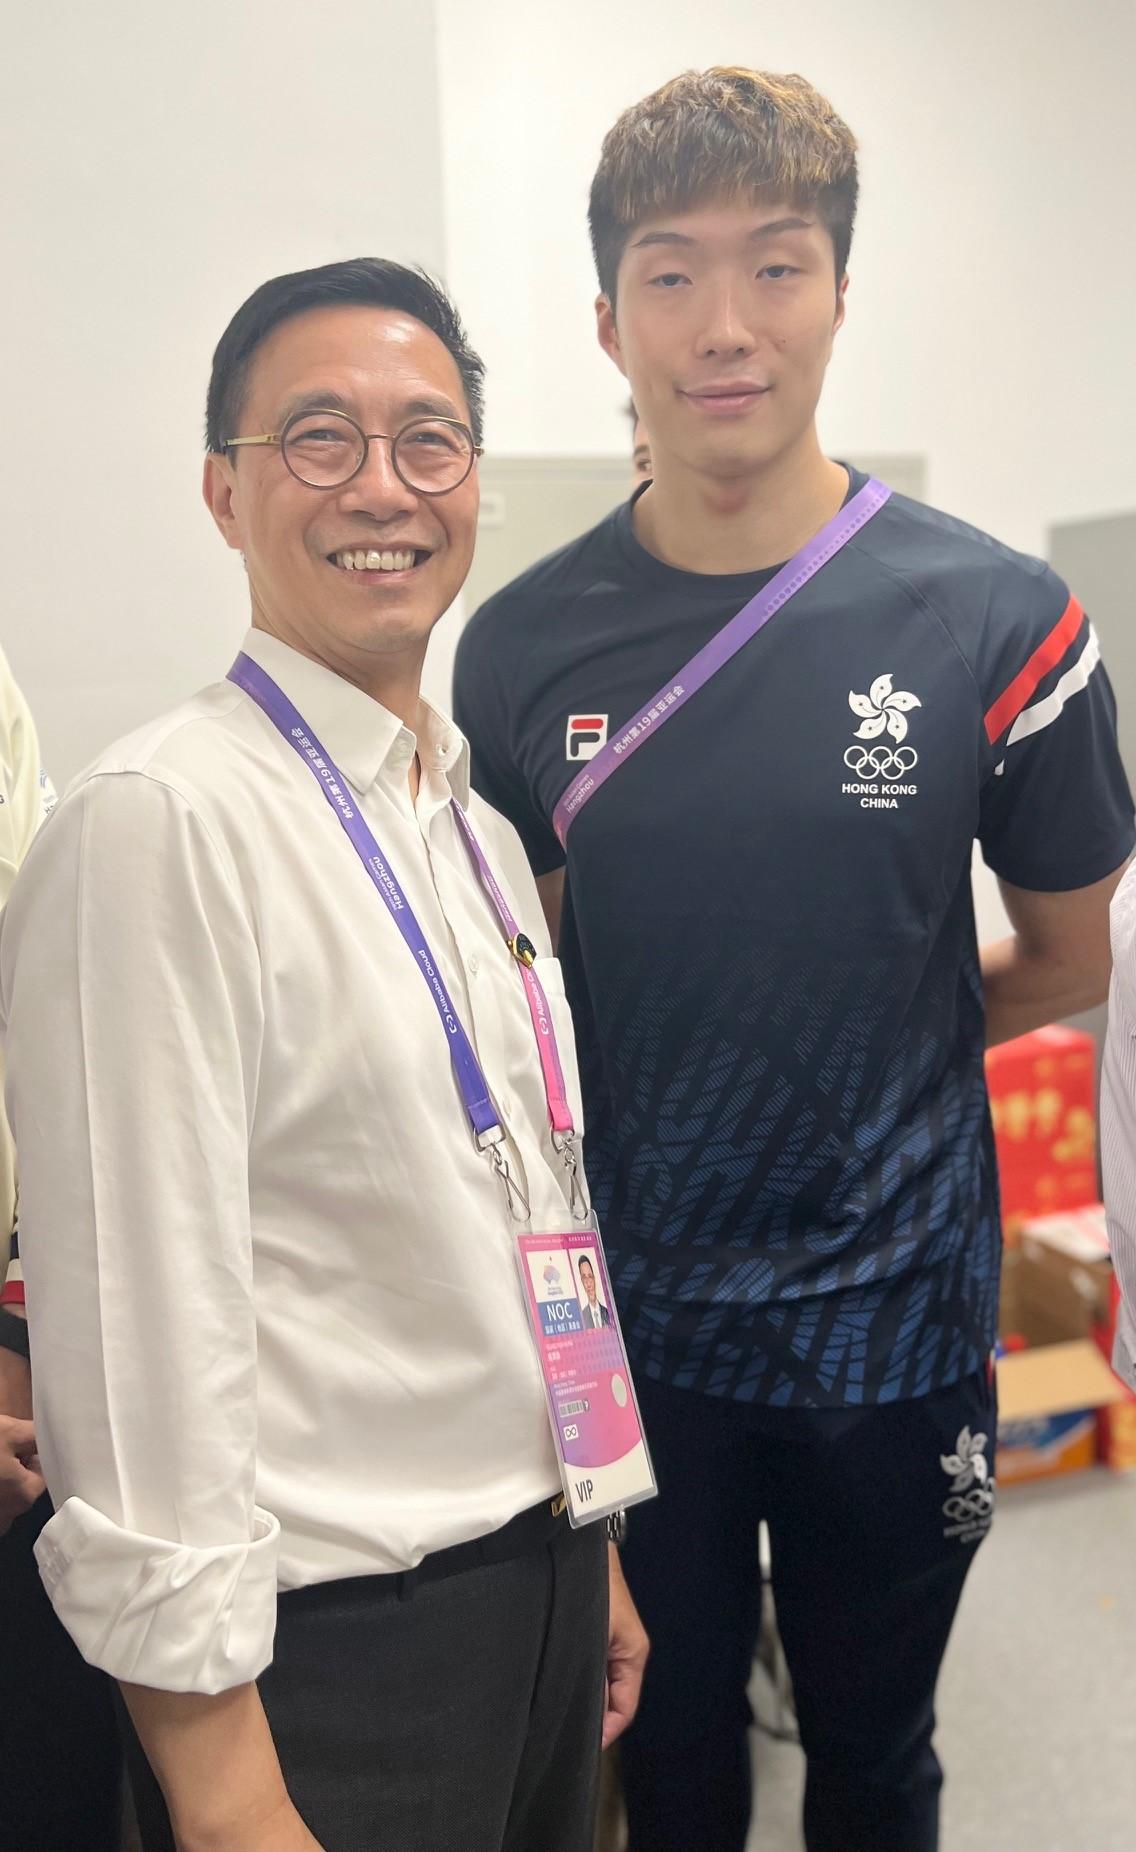 The Secretary for Culture, Sports and Tourism, Mr Kevin Yeung (left), today (September 24) congratulated fencing athlete Cheung Ka-long on winning a gold medal in Men's Foil Individual at the 19th Asian Games Hangzhou.